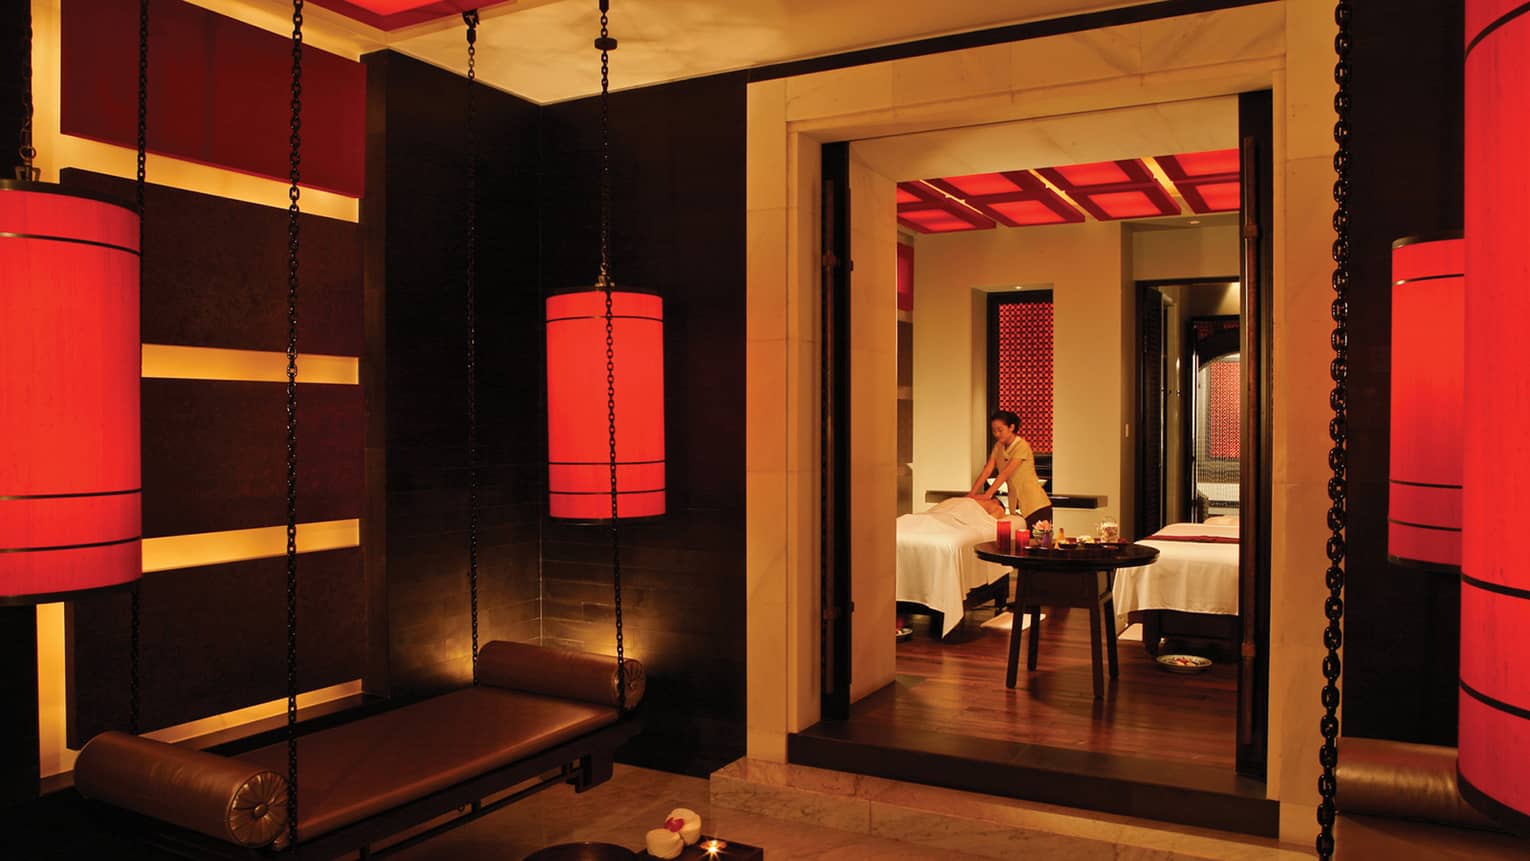 Spa staff gives massage on table behind doorway in dark spa with hanging red lanterns